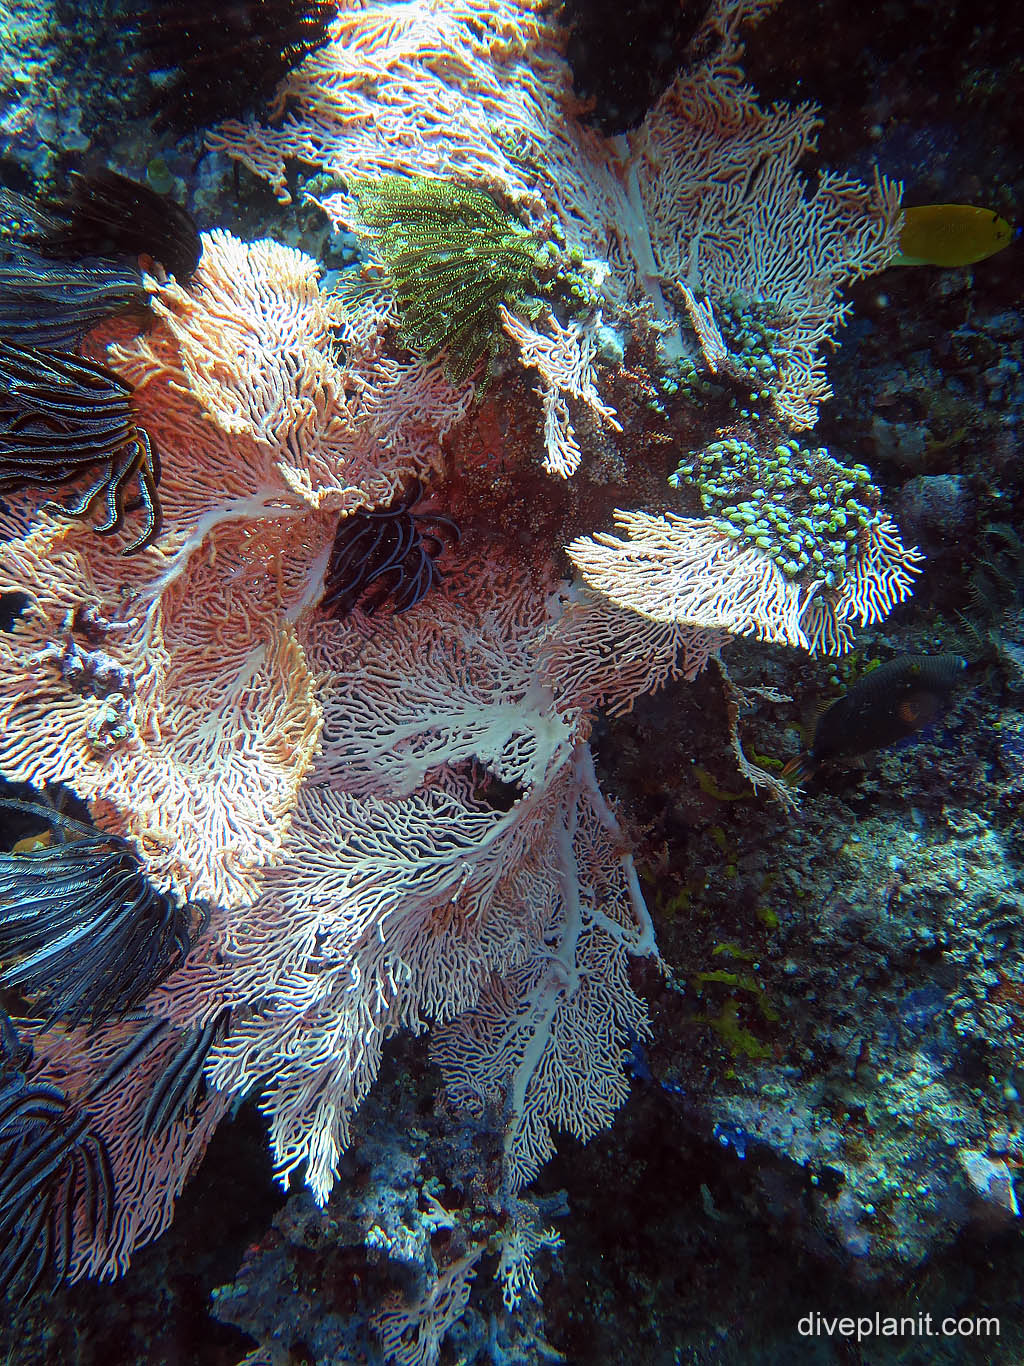 White sea ferns with featherstars at Sahaung on Bangka Island diving with Thalassa Resort. Scuba holiday travel planning tips for North Sulawesi - where, who and how